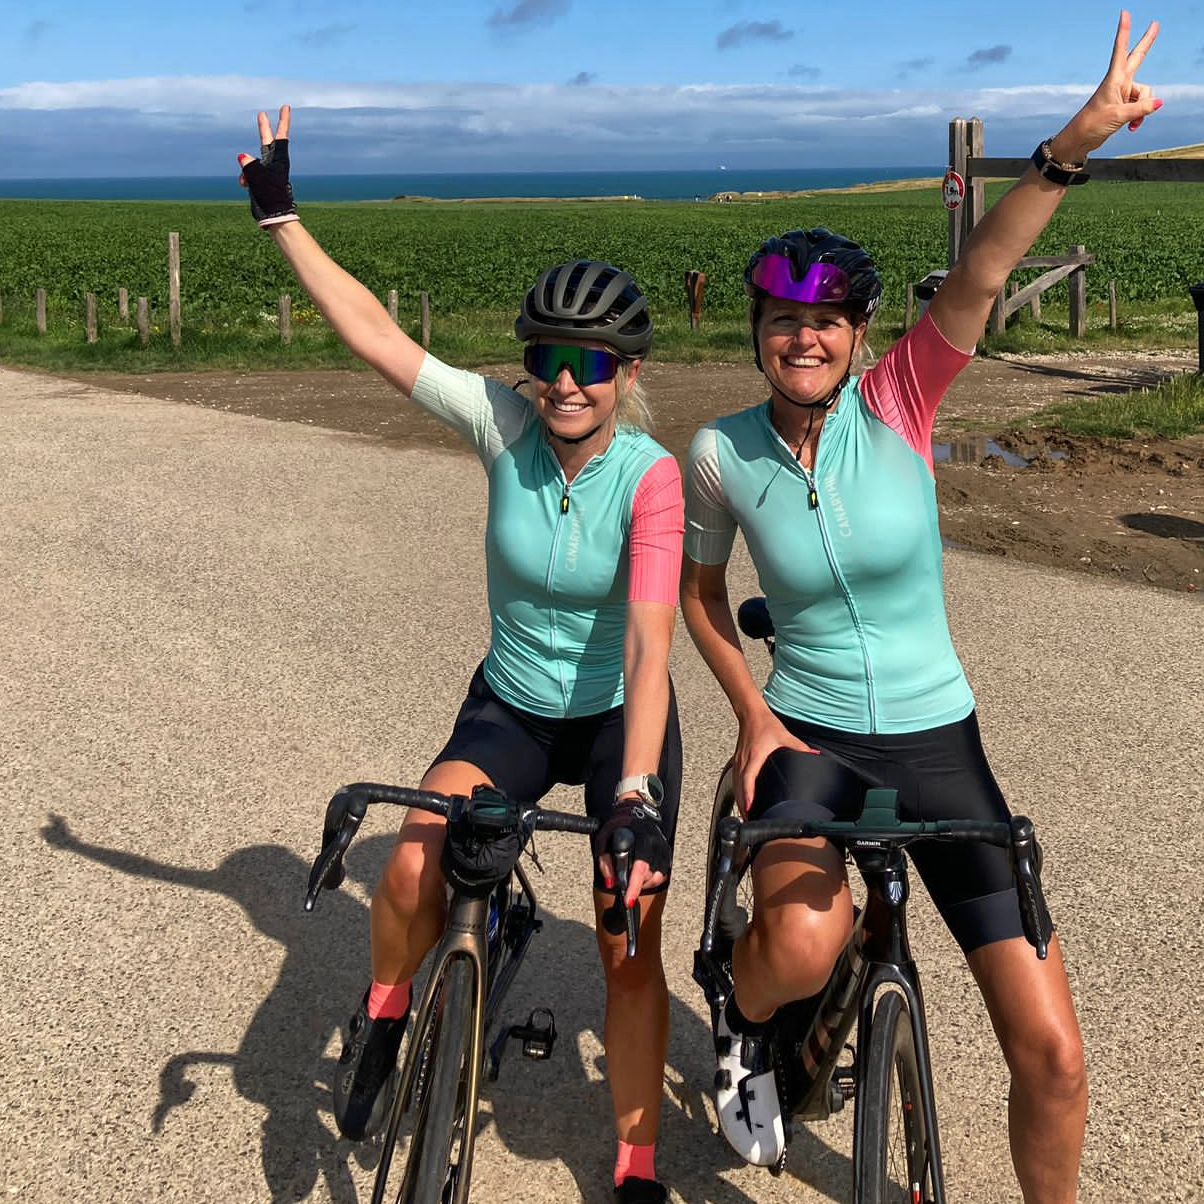 Going the easy way 😜: 165km tailwind ride from Cap Blanc Nez to home.  Beautiful scenery, blue skies, wheat fields, charming villages, more wheat fields, gentle climbs and good company. ✅️
And a special thanks to @yvesvk for getting up early to drop us off.